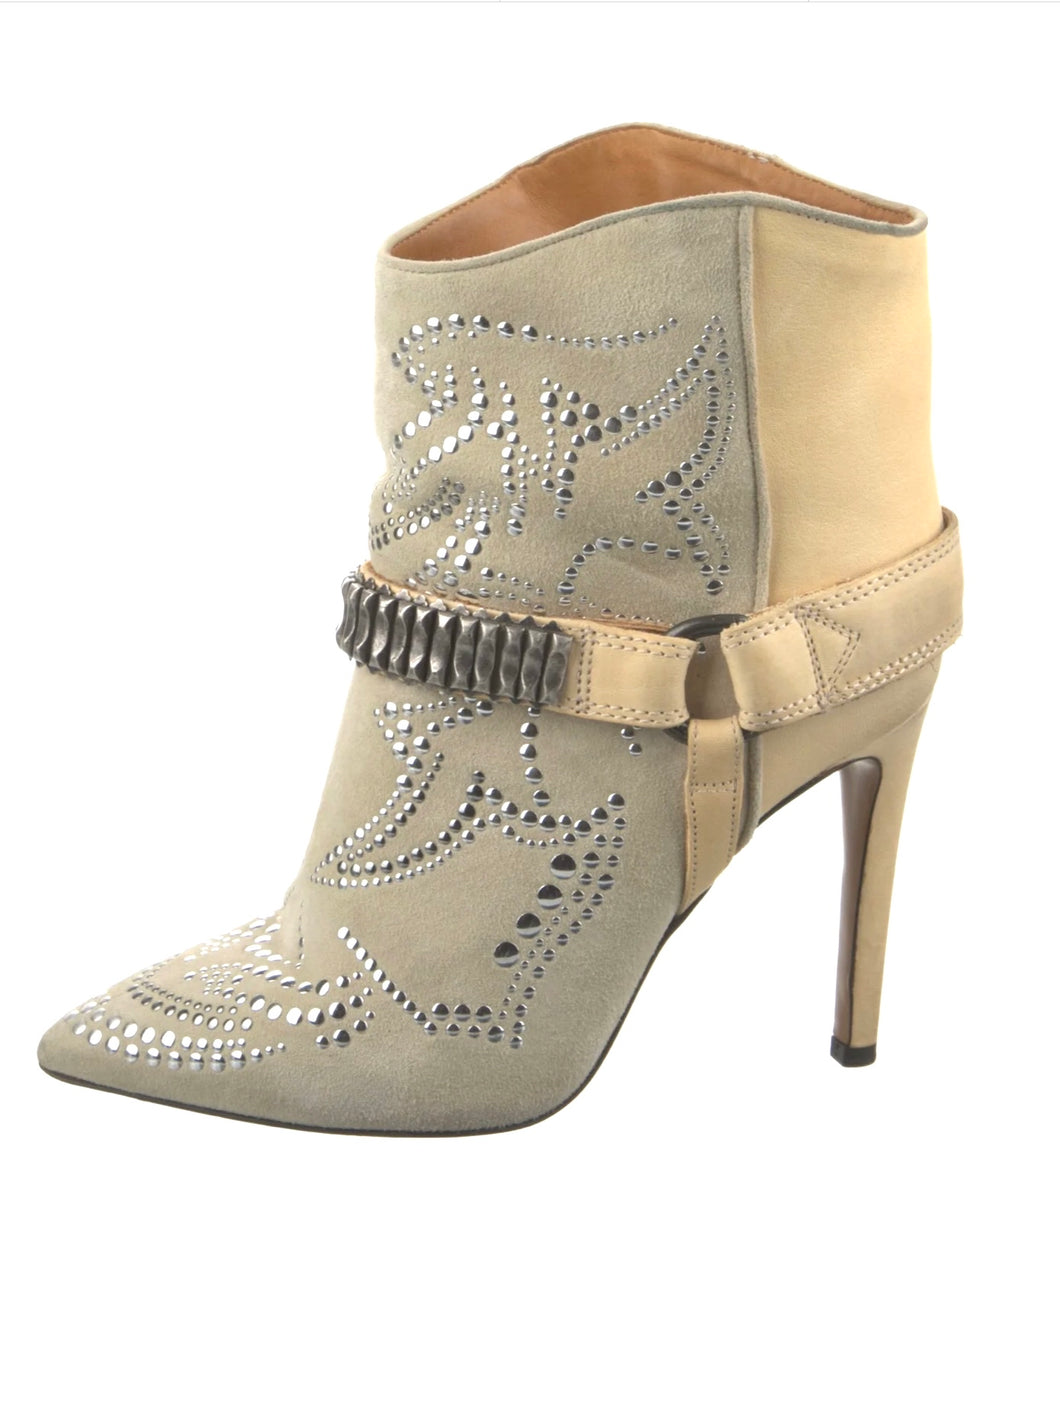 ISABEL MARANT MILWAUKEE Suede studded Boots, Size: FR 37